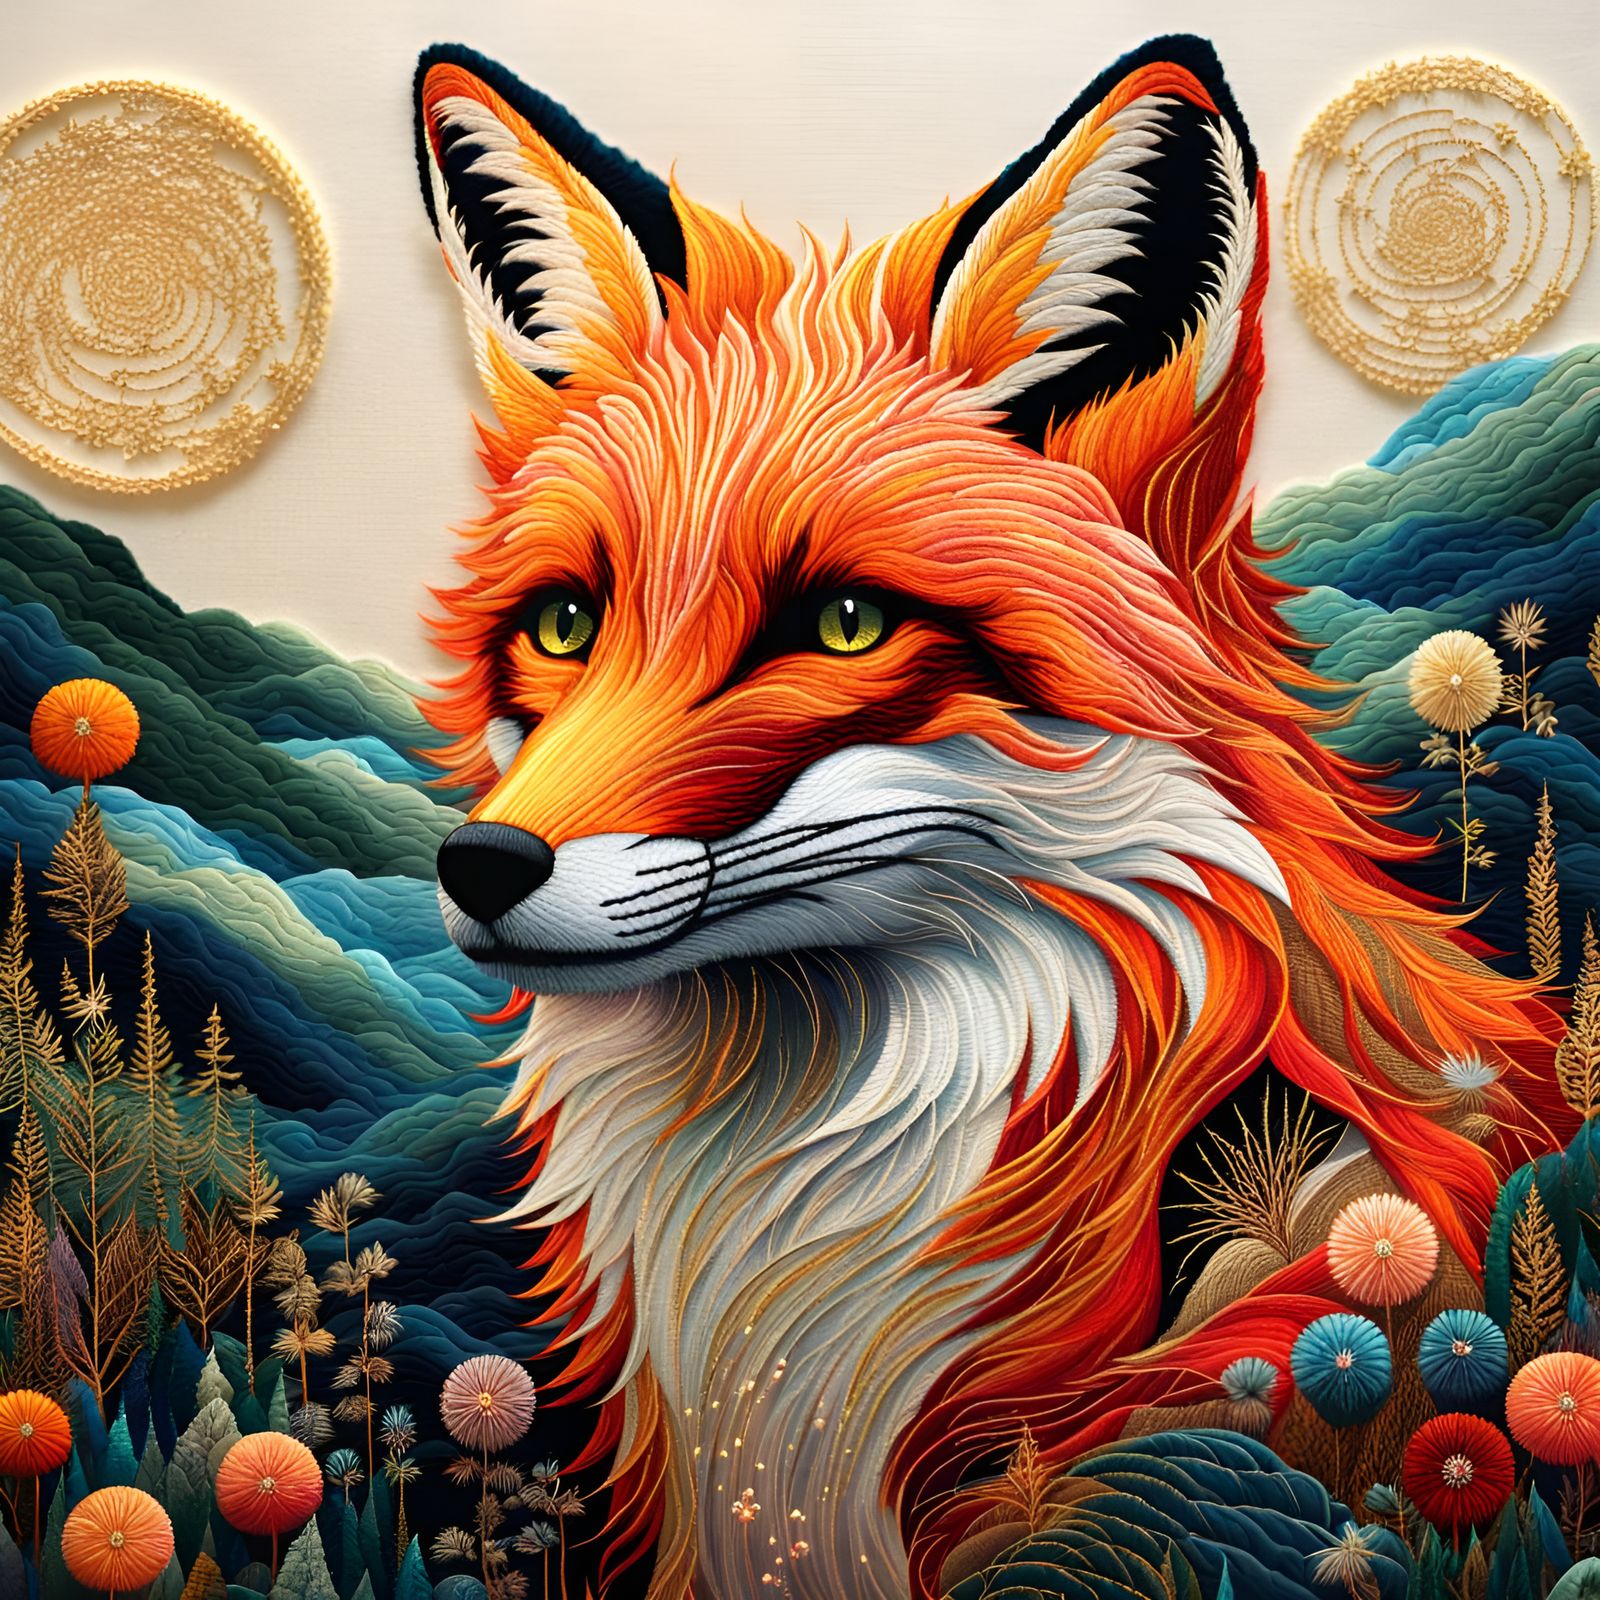 The clever red fox